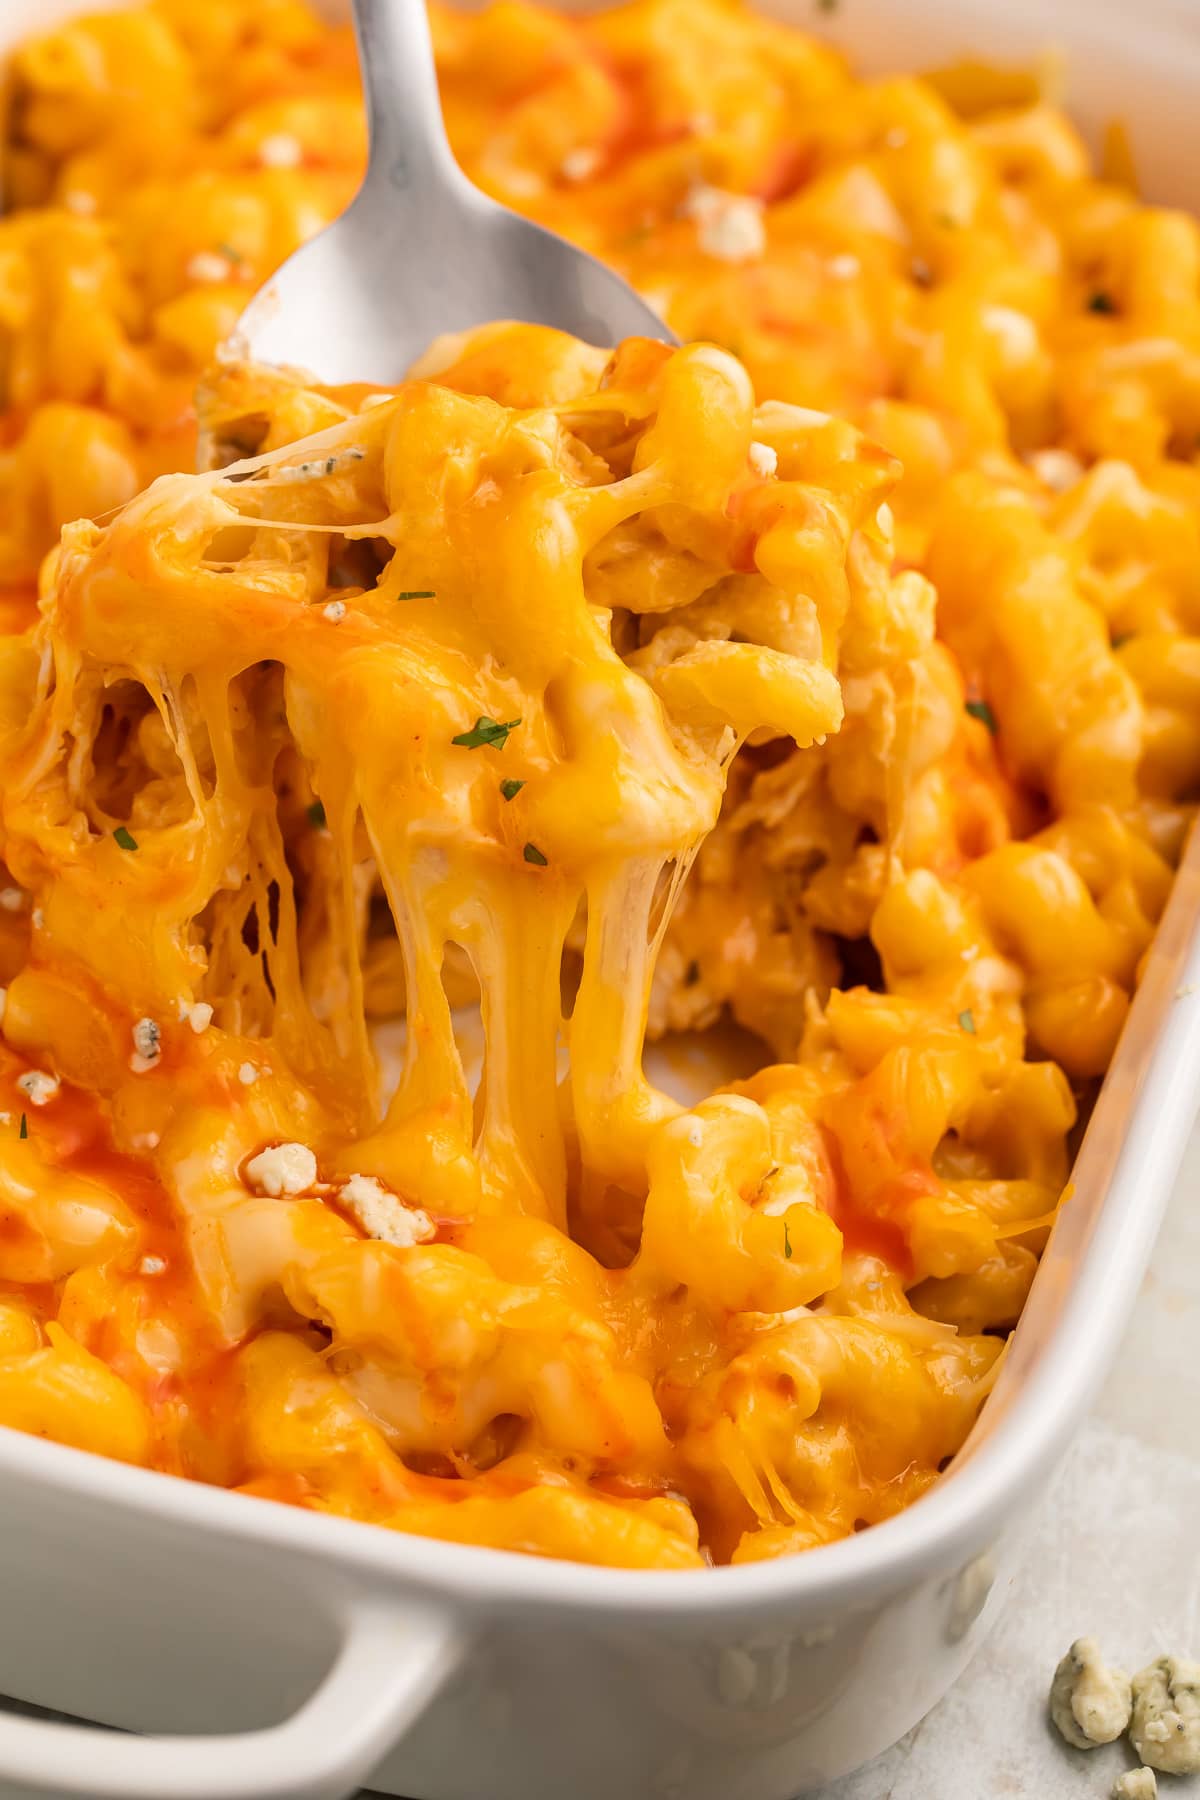 A large spoonful of orange buffalo chicken mac and cheese being lifted out of a casserole dish.